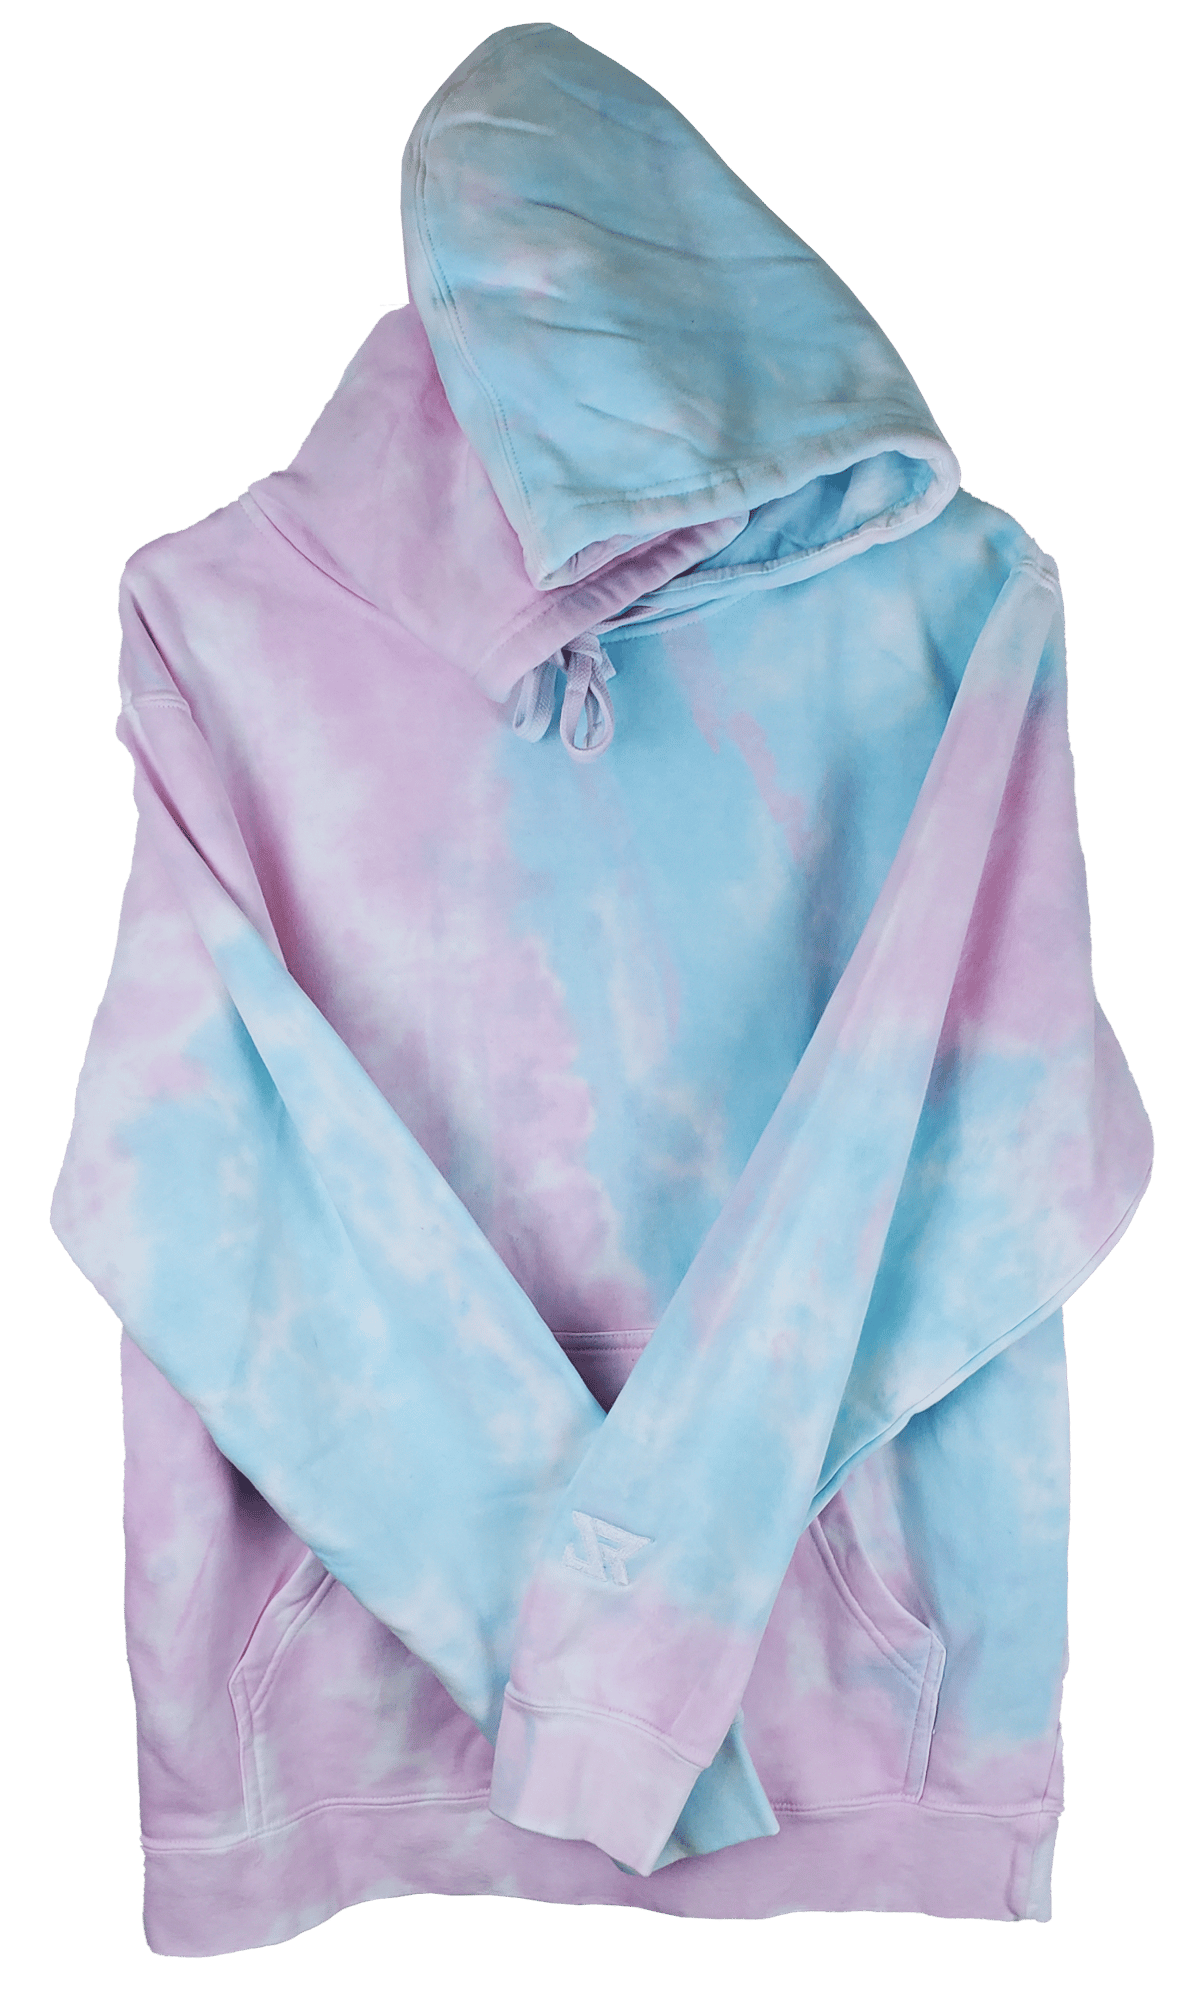 Image of Cotton Candy tie dye